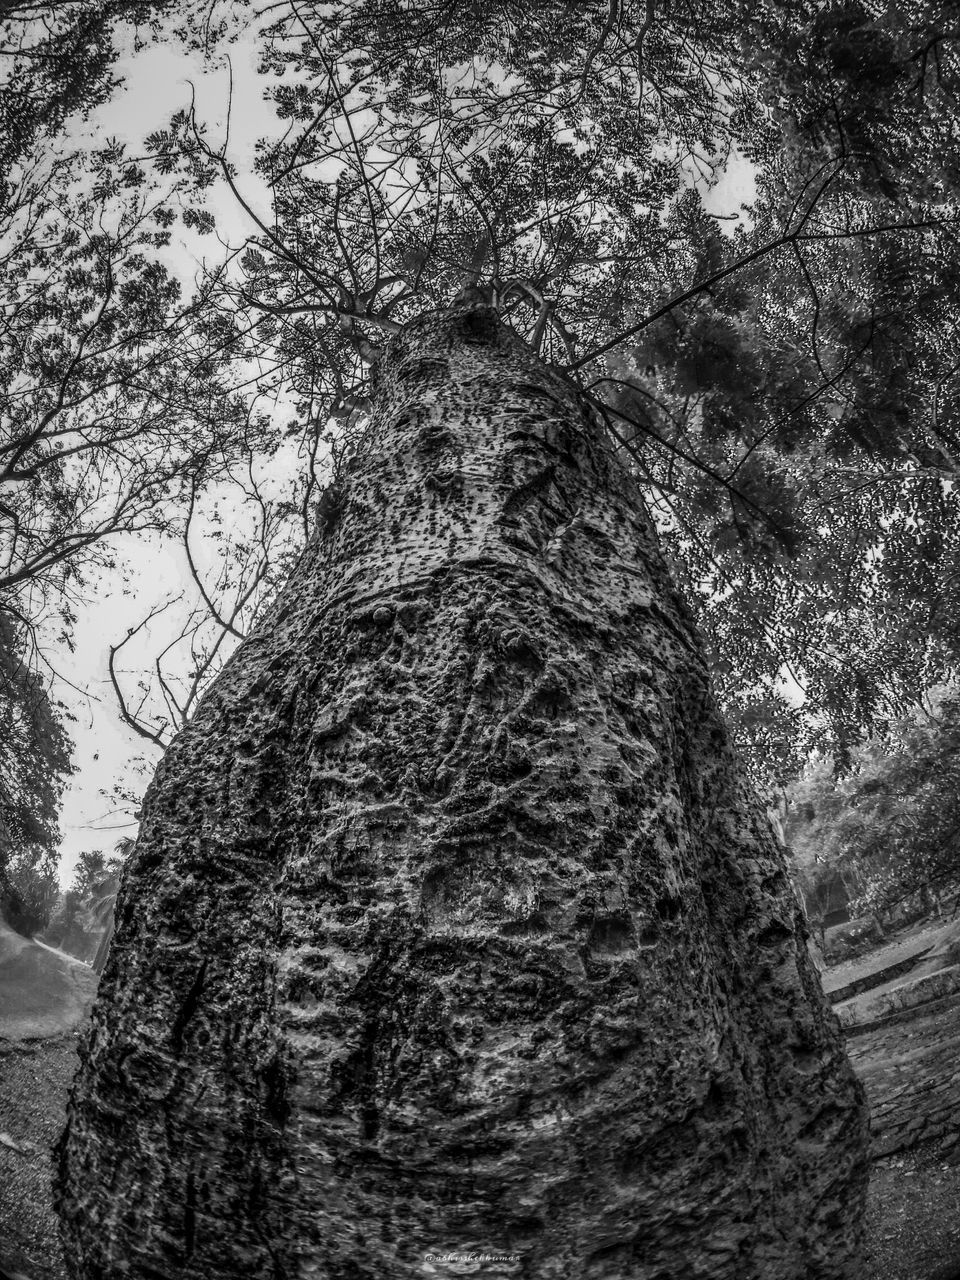 tree, plant, tree trunk, trunk, growth, nature, no people, branch, bark, day, textured, forest, low angle view, rough, outdoors, tranquility, woodland, land, plant bark, close-up